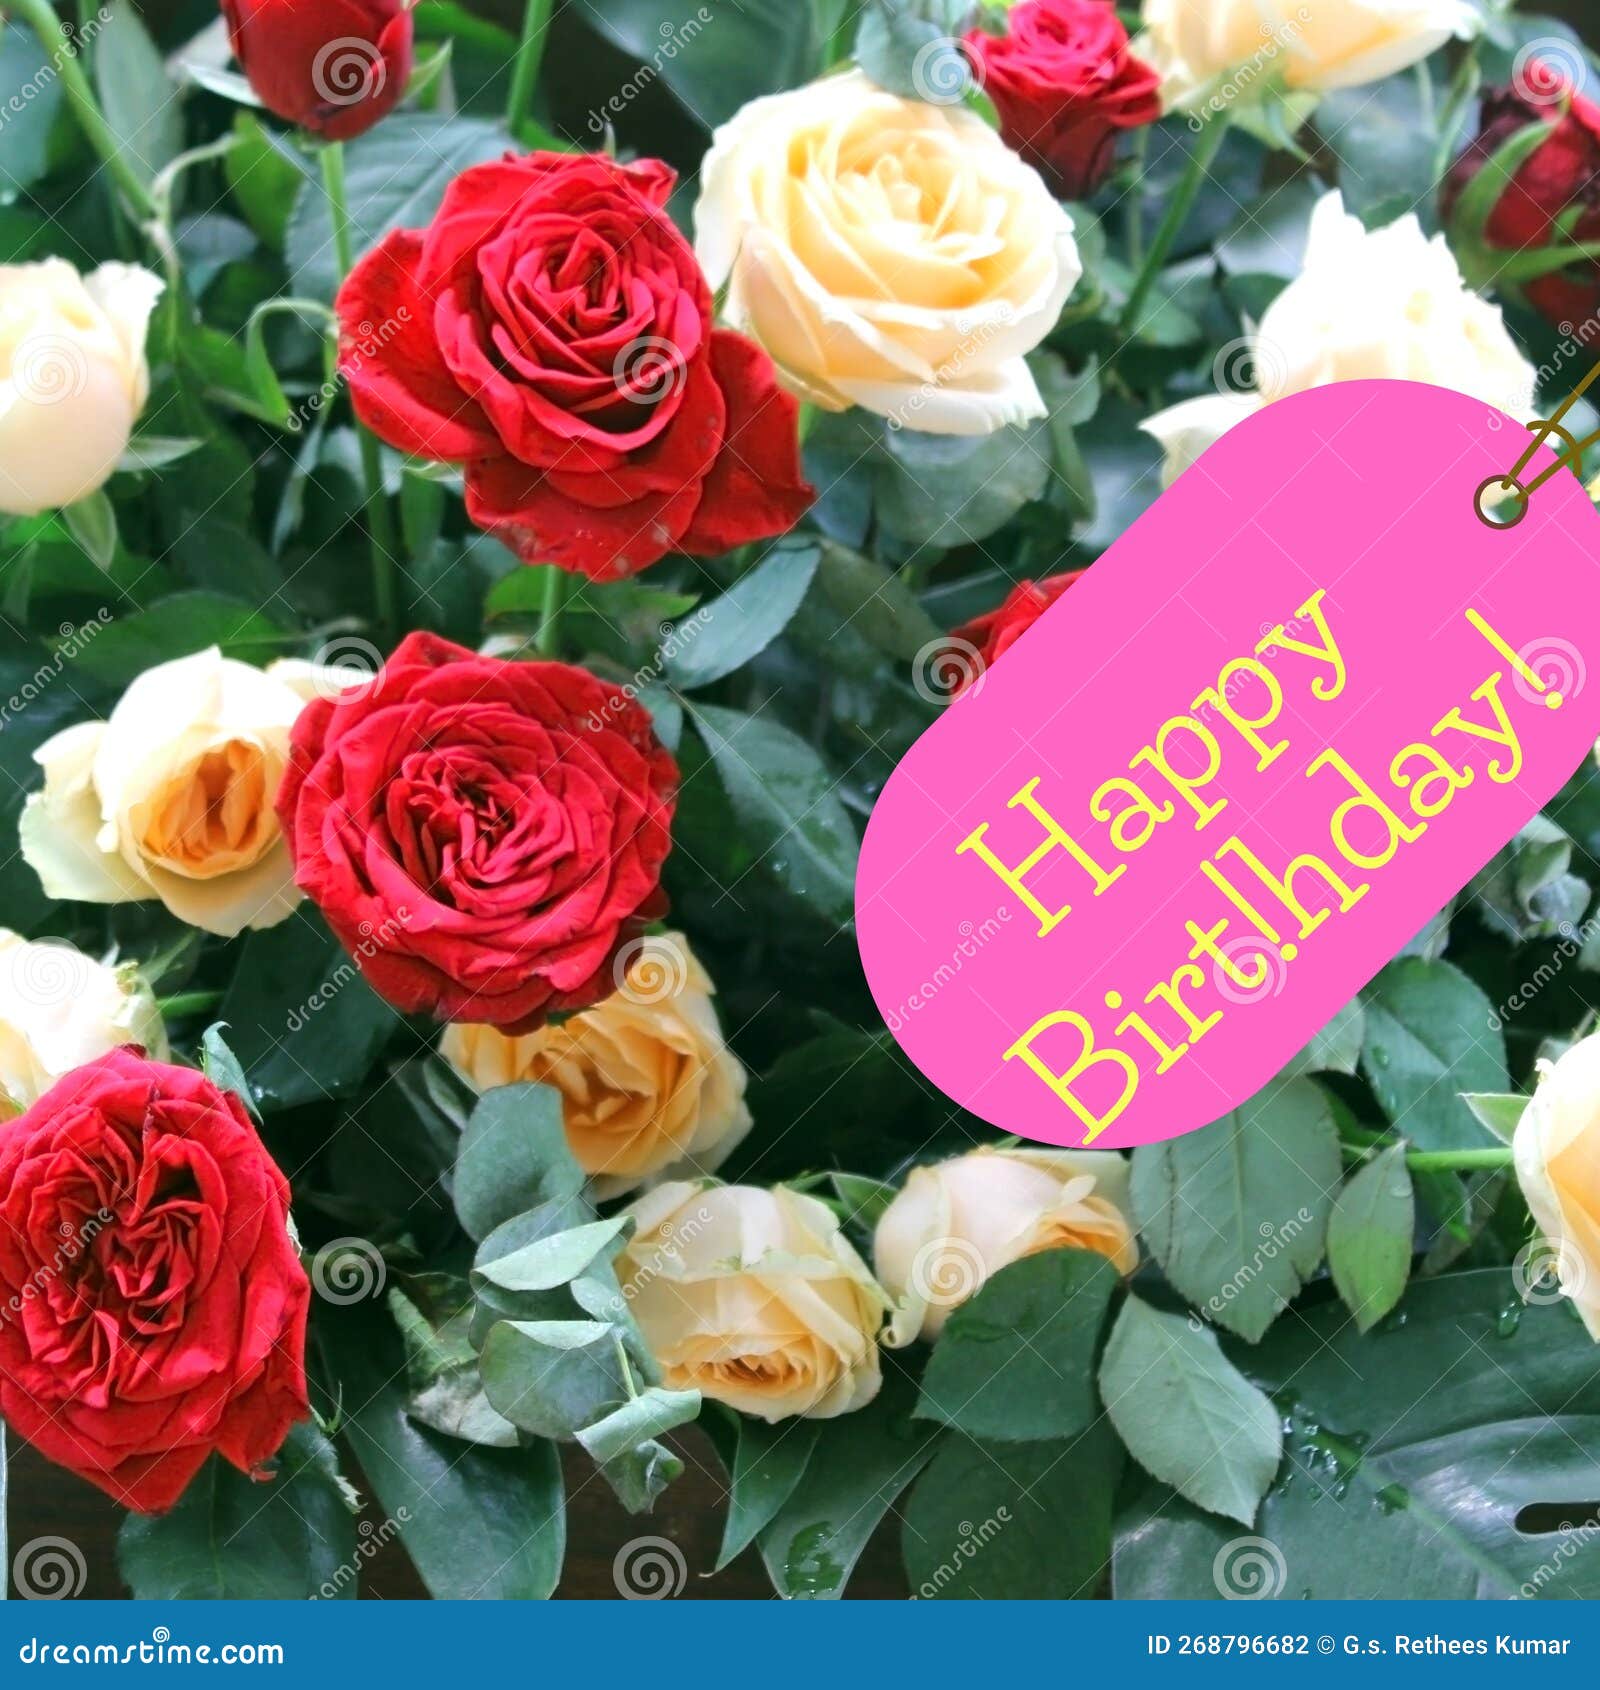 Happy Birthday Note And Colorful Bouquet Of Roses Stock Photo